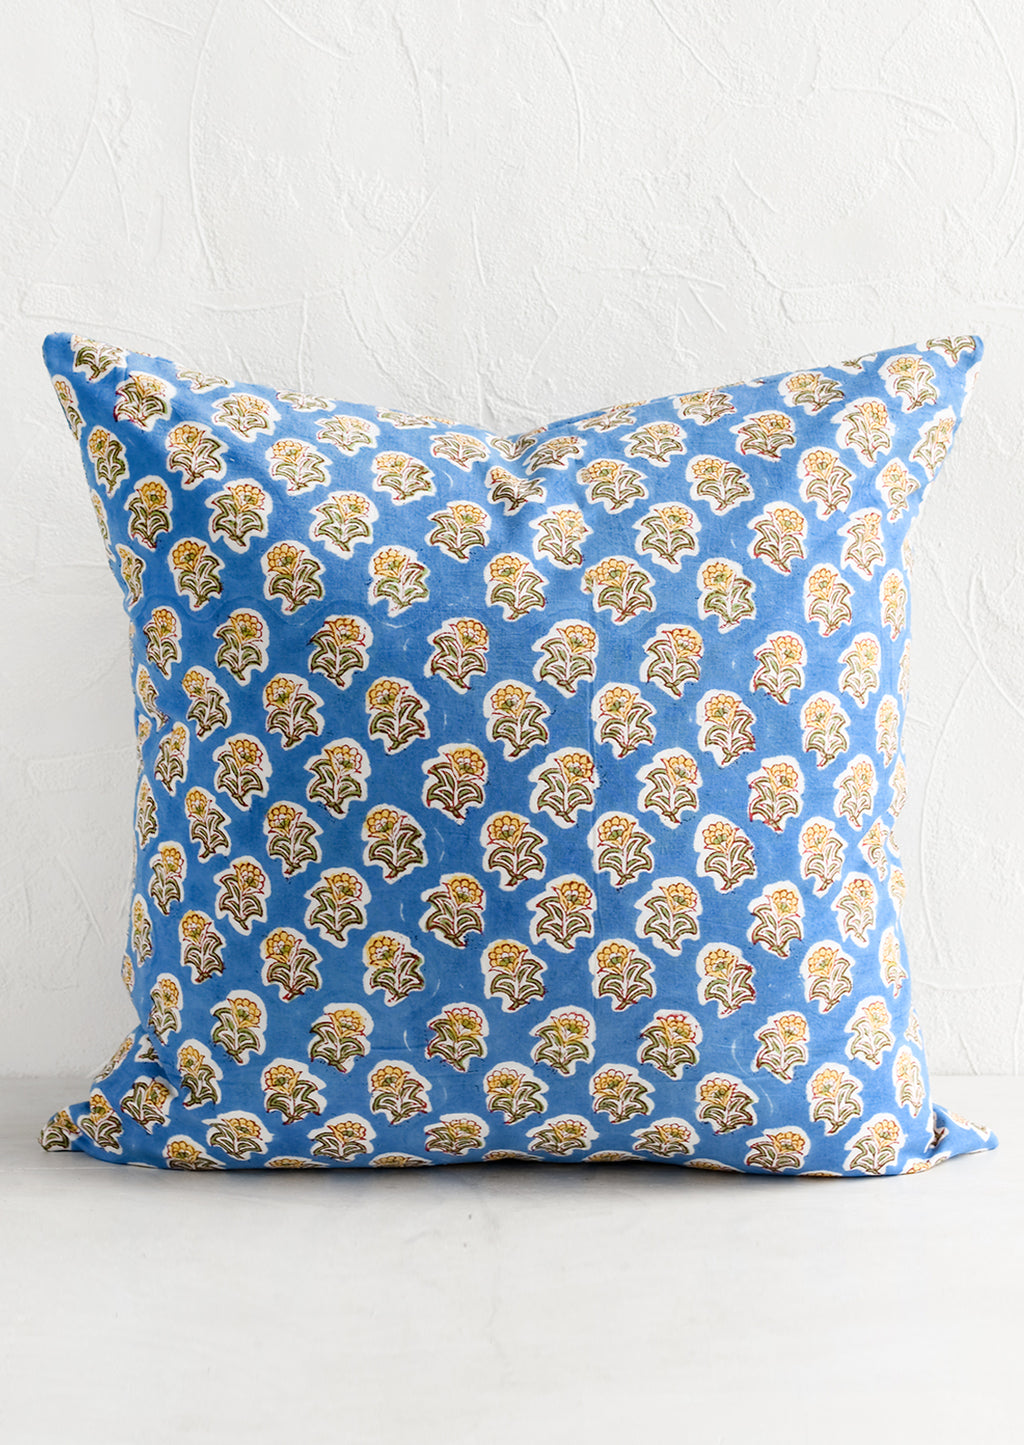 1: A block printed throw pillow in blue and yellow floral.